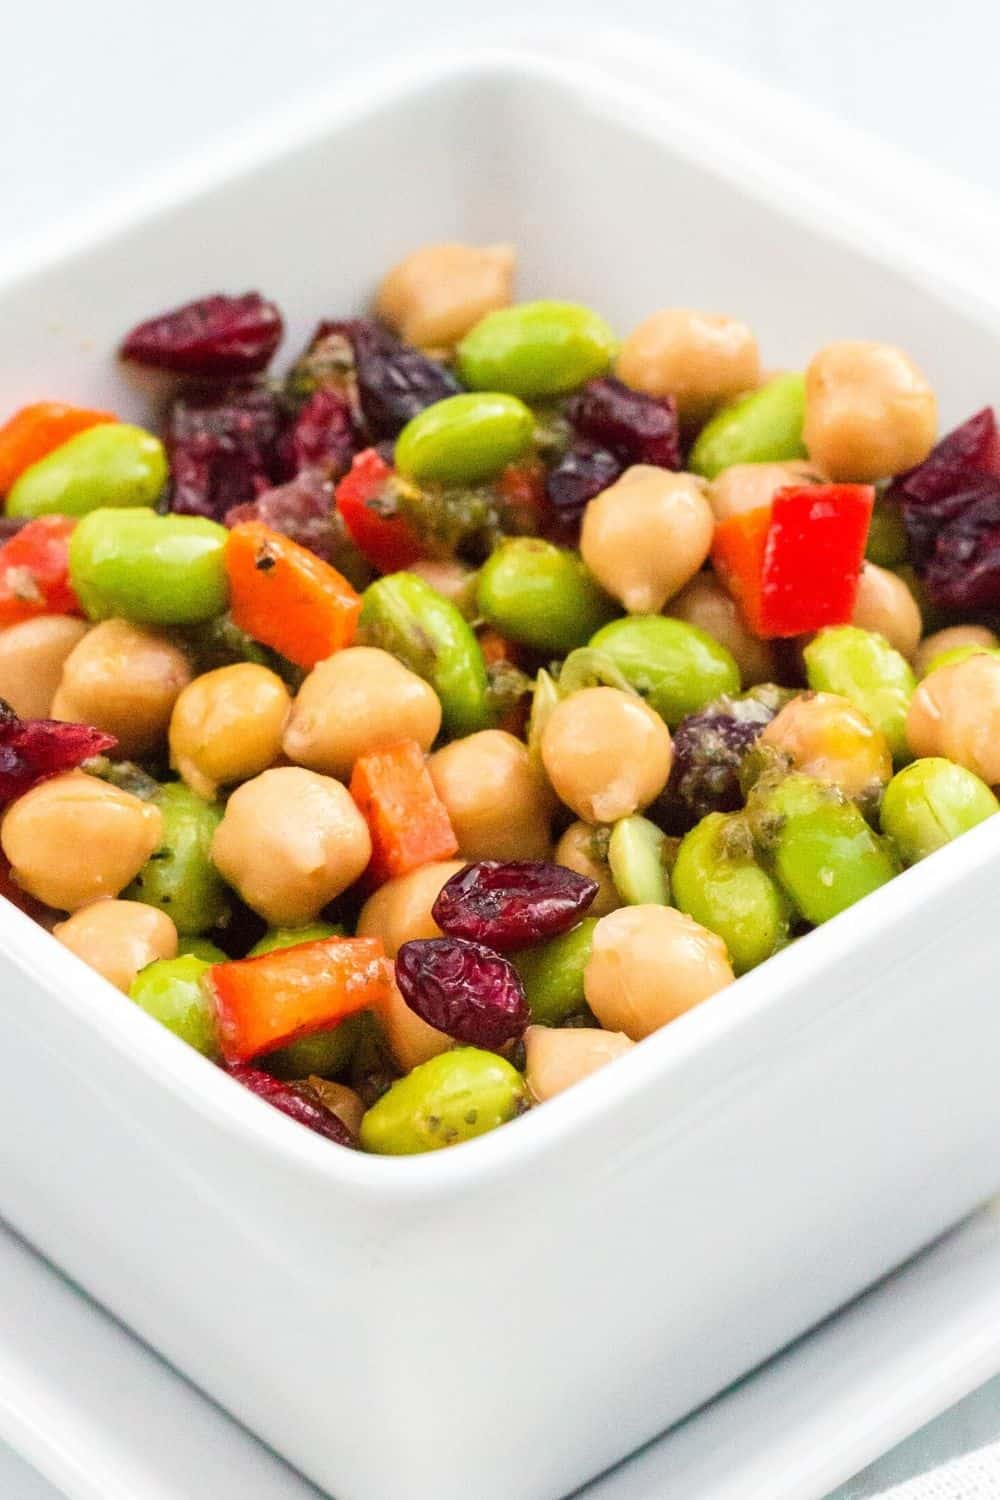 chickpea salad with cranberries, edamame, peppers, and carrots, served in a white bowl